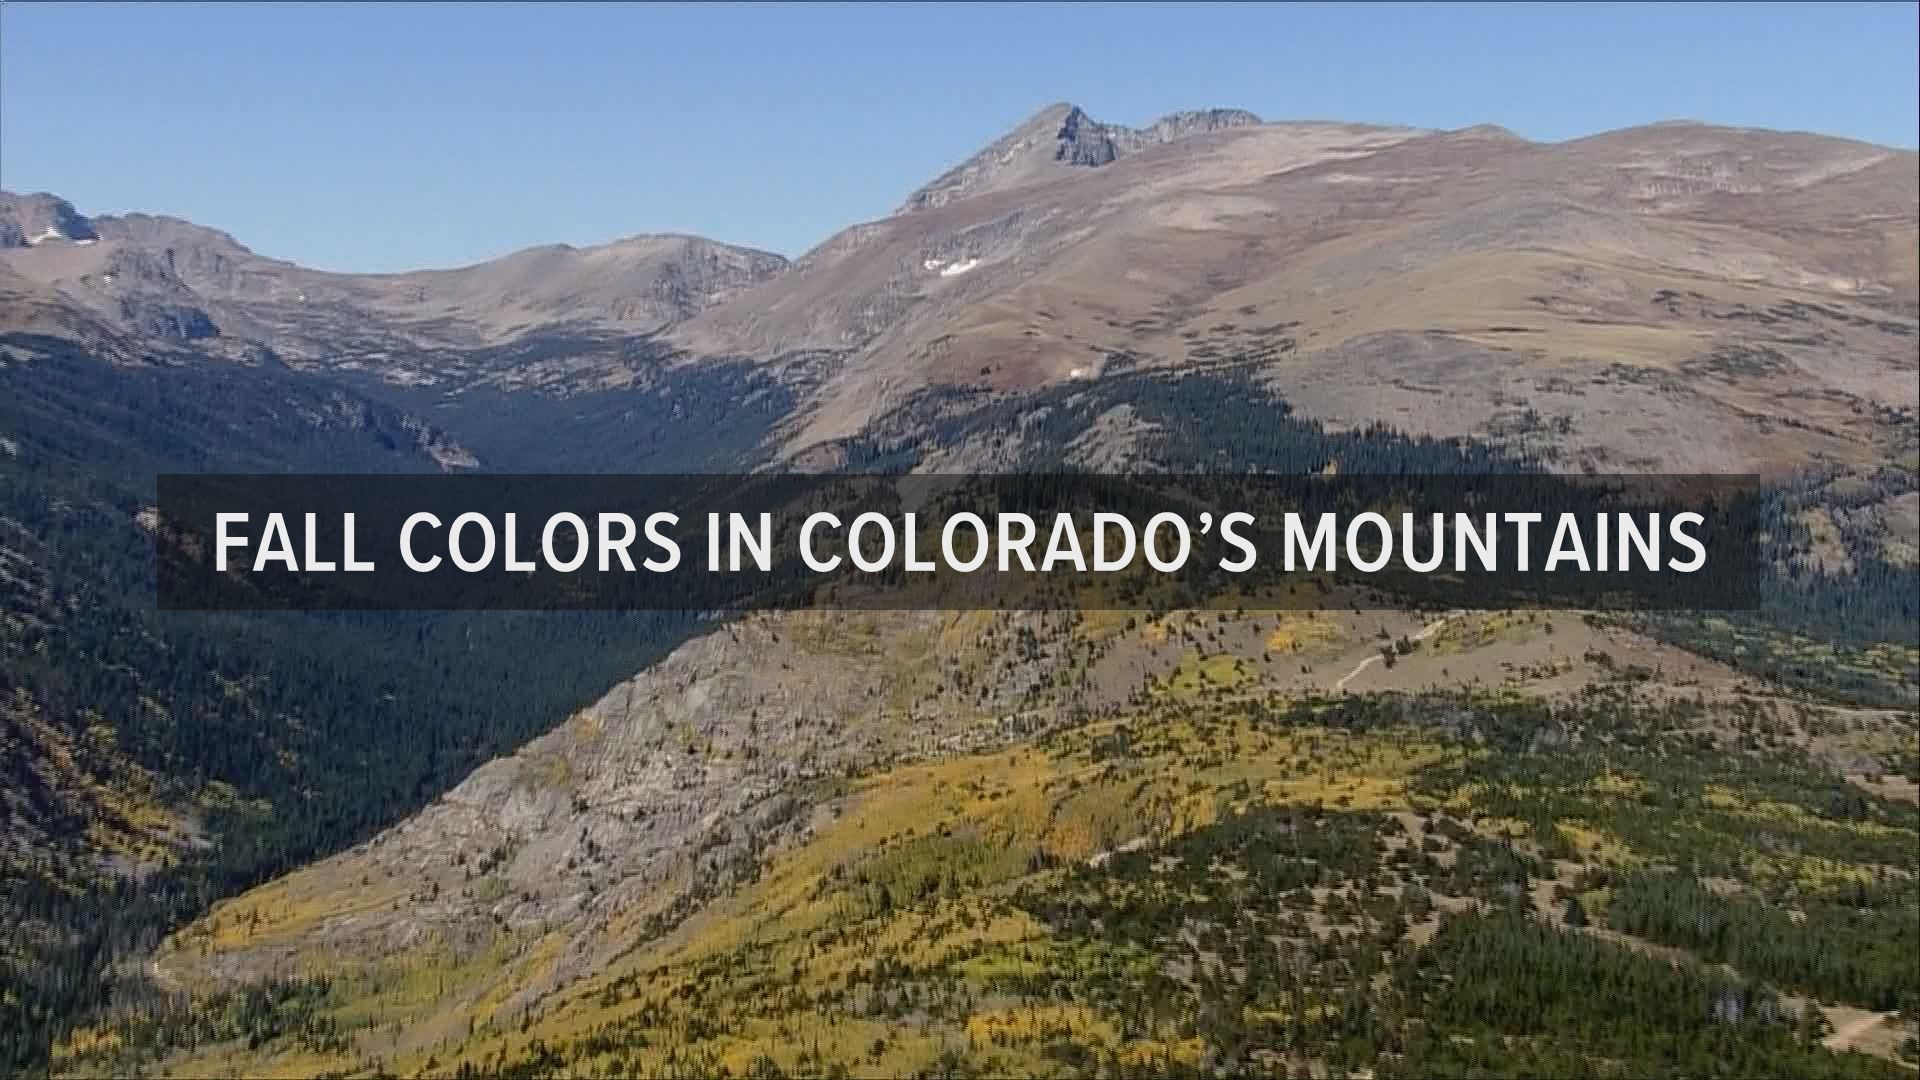 Take in this aerial view of changing fall leaves in Colorado’s High Country.